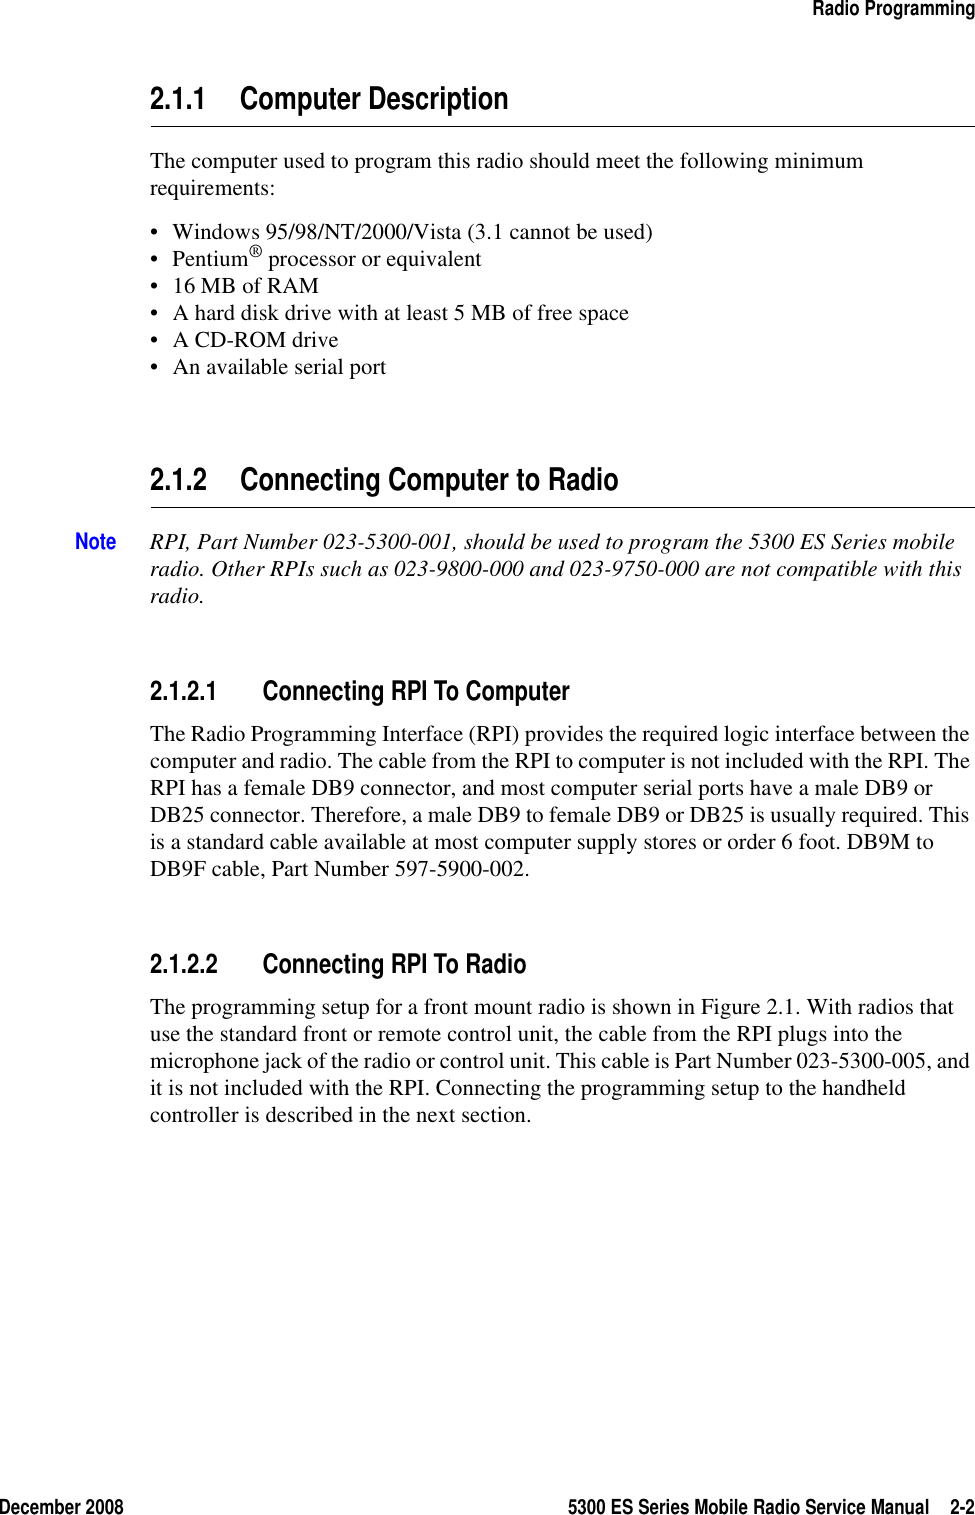 December 2008 5300 ES Series Mobile Radio Service Manual 2-2Radio Programming2.1.1 Computer DescriptionThe computer used to program this radio should meet the following minimum requirements:• Windows 95/98/NT/2000/Vista (3.1 cannot be used)•Pentium® processor or equivalent• 16 MB of RAM• A hard disk drive with at least 5 MB of free space• A CD-ROM drive• An available serial port2.1.2 Connecting Computer to Radio Note RPI, Part Number 023-5300-001, should be used to program the 5300 ES Series mobile radio. Other RPIs such as 023-9800-000 and 023-9750-000 are not compatible with this radio.2.1.2.1 Connecting RPI To ComputerThe Radio Programming Interface (RPI) provides the required logic interface between the computer and radio. The cable from the RPI to computer is not included with the RPI. The RPI has a female DB9 connector, and most computer serial ports have a male DB9 or DB25 connector. Therefore, a male DB9 to female DB9 or DB25 is usually required. This is a standard cable available at most computer supply stores or order 6 foot. DB9M to DB9F cable, Part Number 597-5900-002.2.1.2.2 Connecting RPI To RadioThe programming setup for a front mount radio is shown in Figure 2.1. With radios that use the standard front or remote control unit, the cable from the RPI plugs into the microphone jack of the radio or control unit. This cable is Part Number 023-5300-005, and it is not included with the RPI. Connecting the programming setup to the handheld controller is described in the next section.